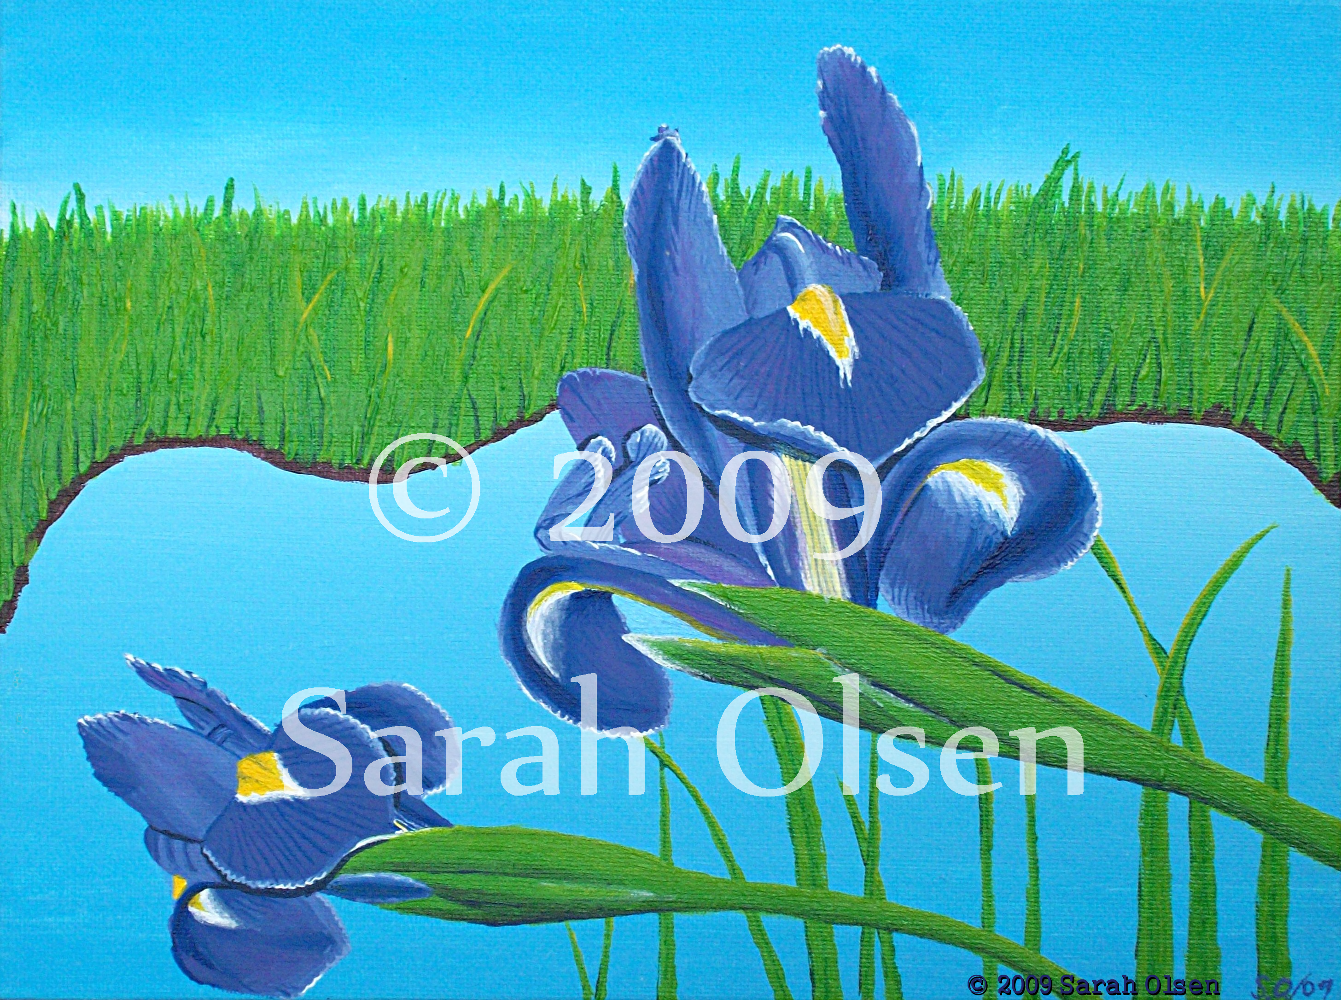 Two beautiful irises rendered in high detail by a beautiful blue pond. The landscape is sunlit without a cloud in the sky.